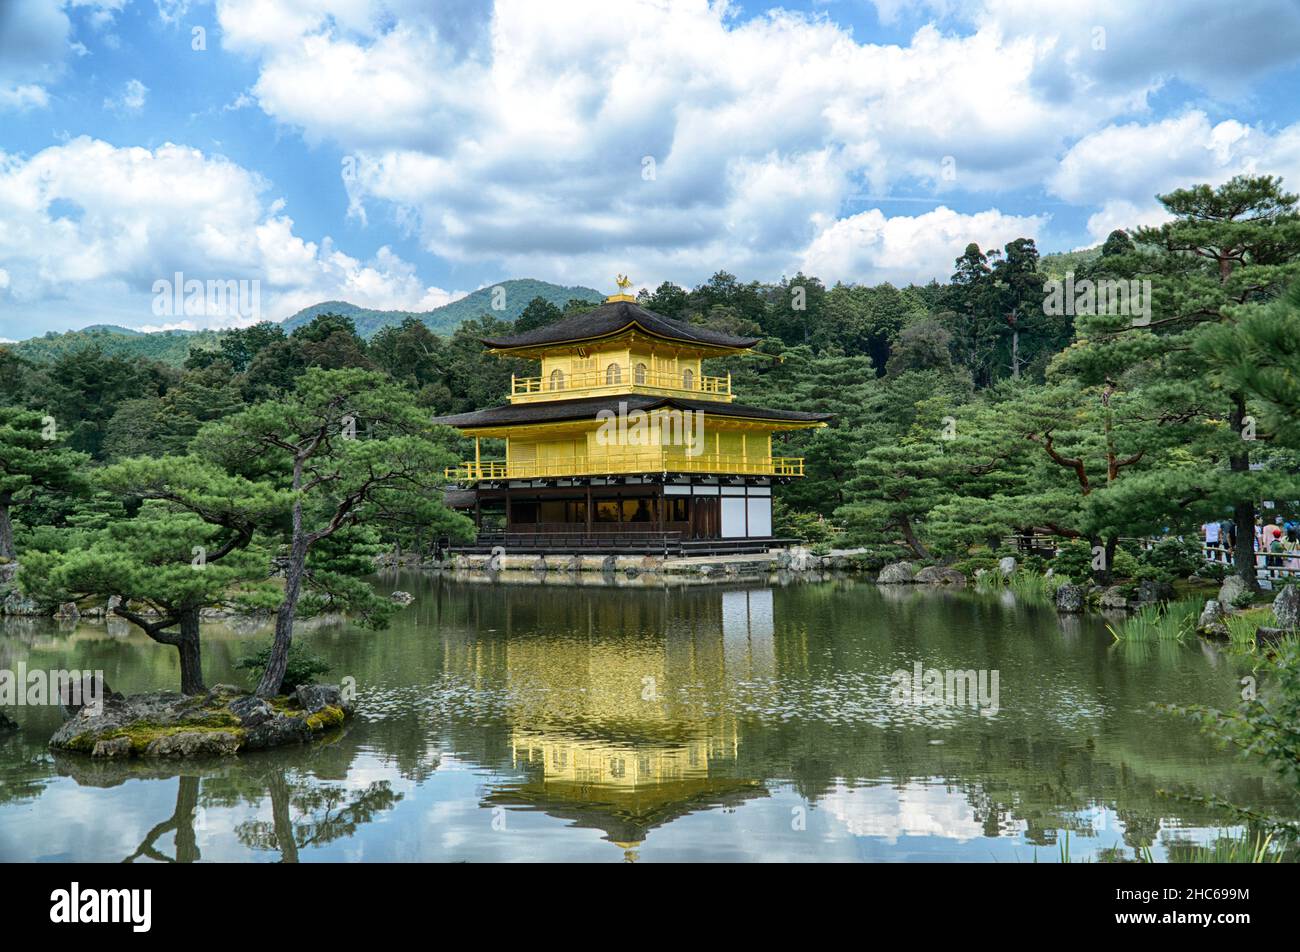 Photo of Kinkaku-ji literally Temple of the Golden Pavilion with reflection of the Pavilion and green trees on water in summer, Kyoto, Japan, Asia Stock Photo